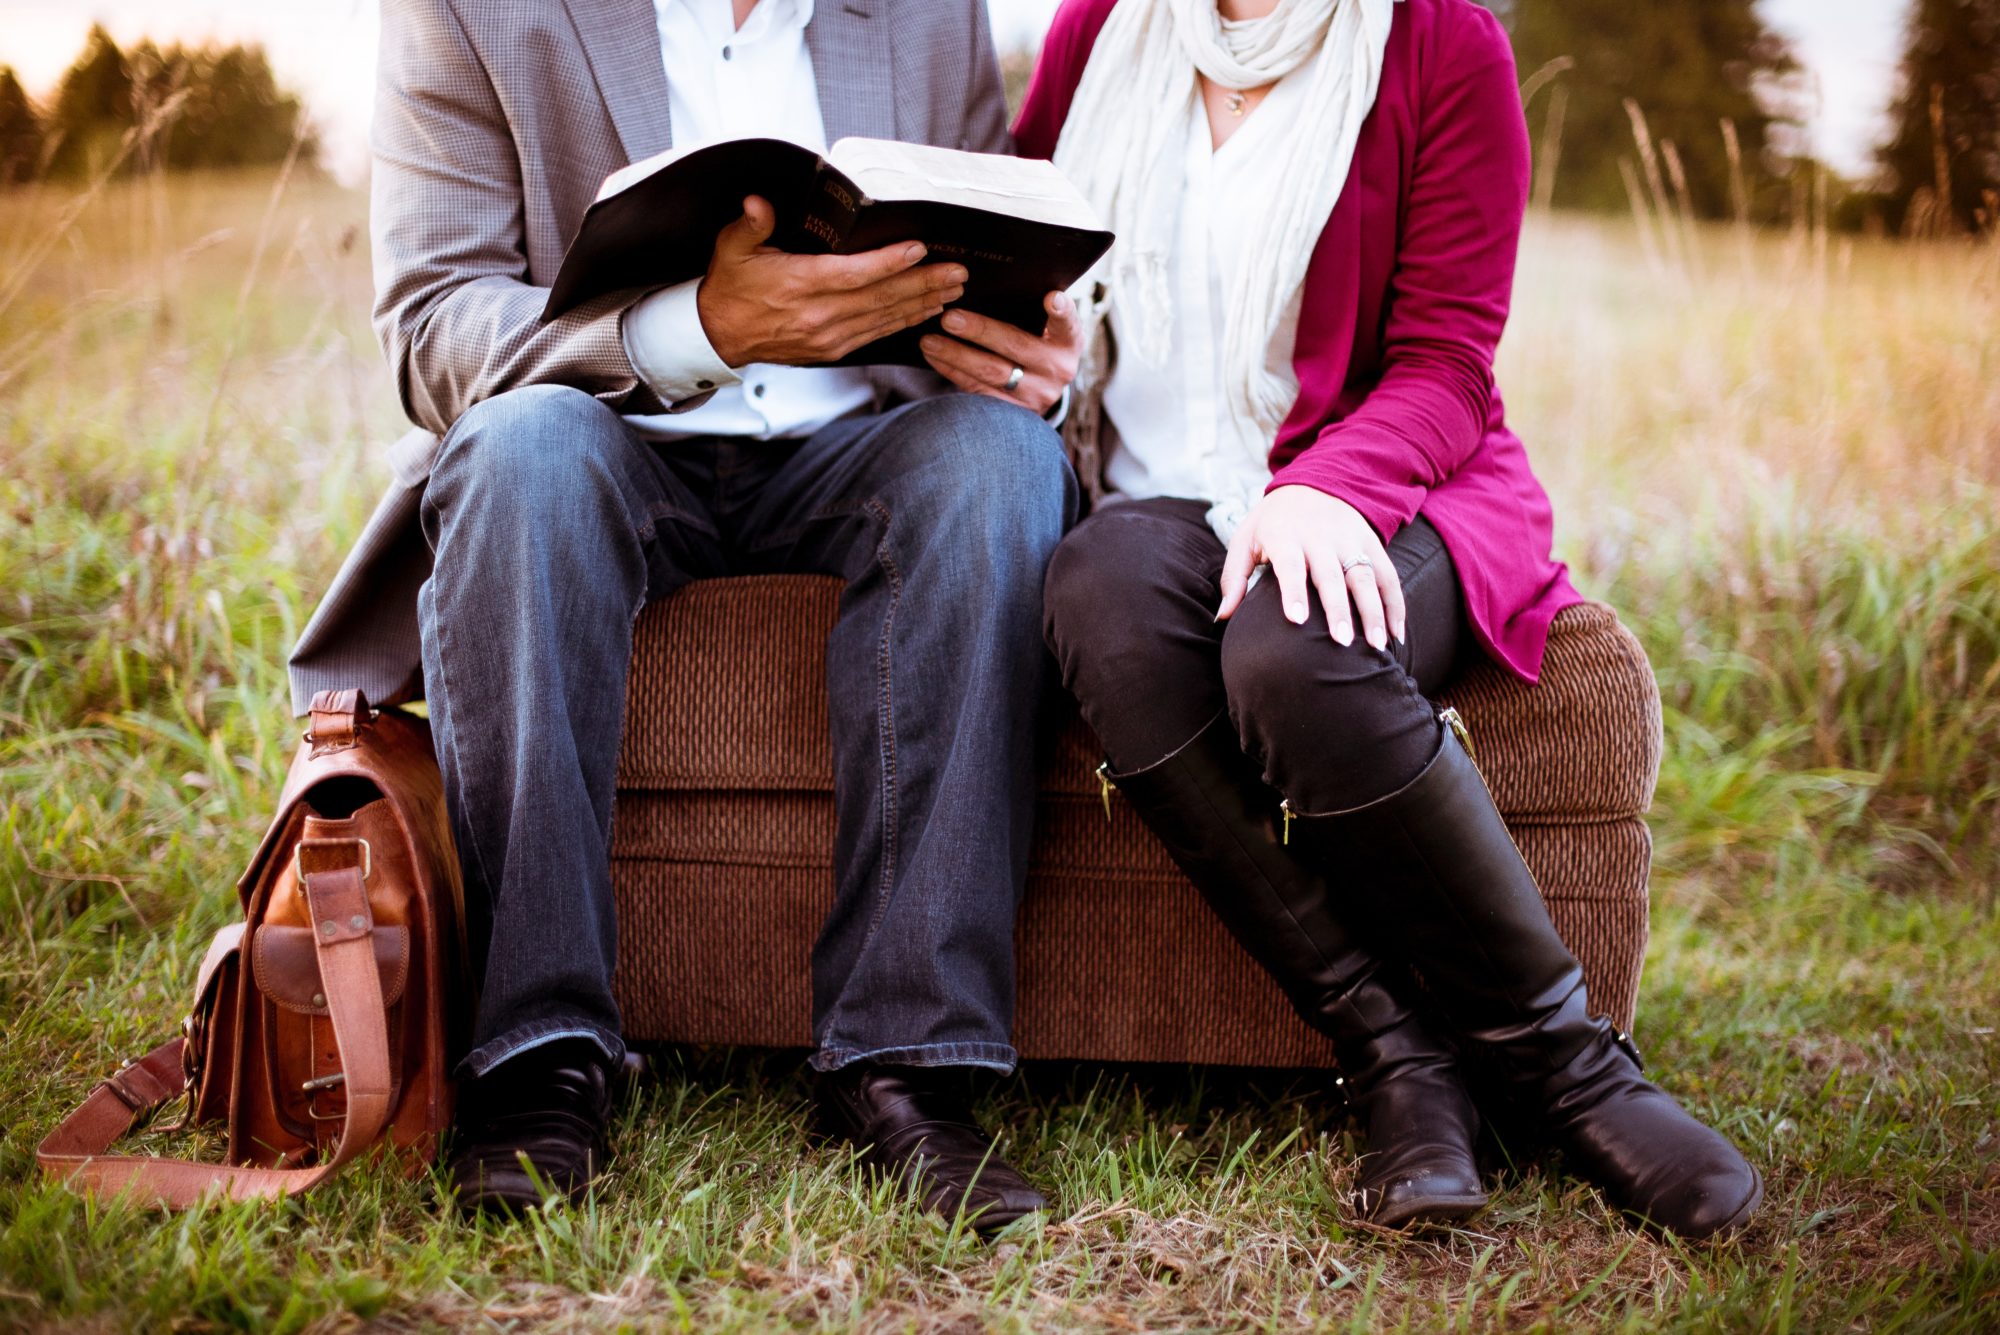 Two people sitting on a stool reading a book outside